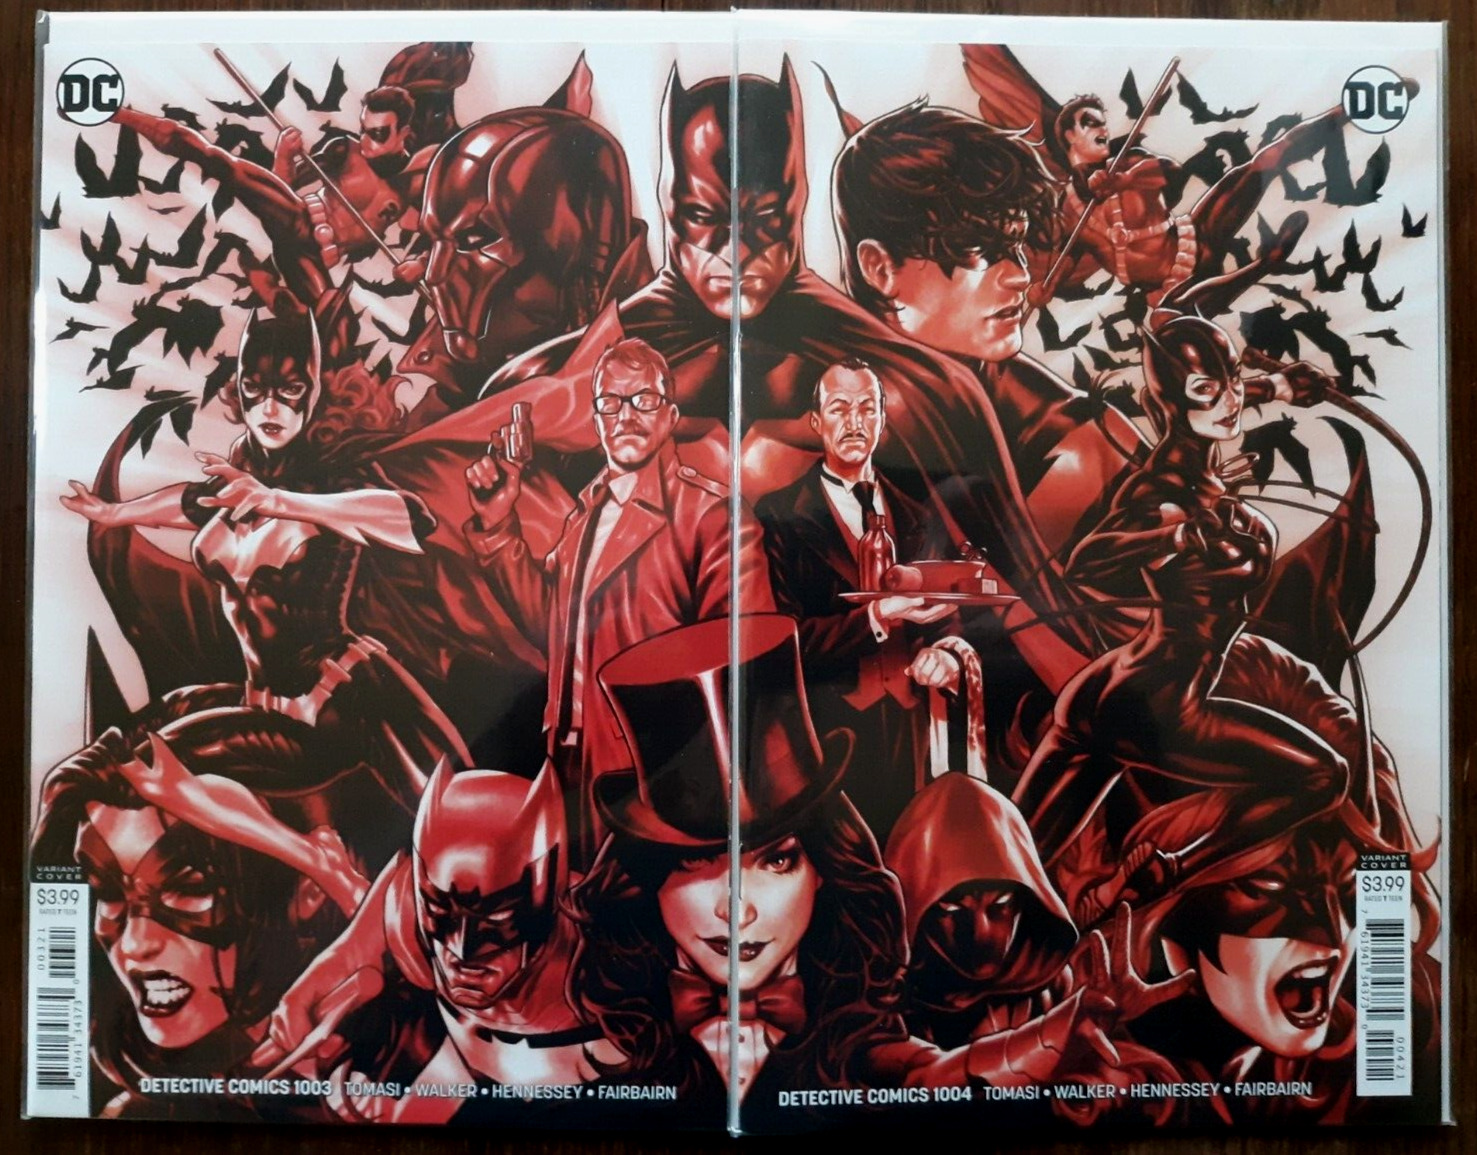 DETECTIVE COMICS #1003 and #1004 (2019 DC) CONNECTING COVERS *FREE SHIPPING*